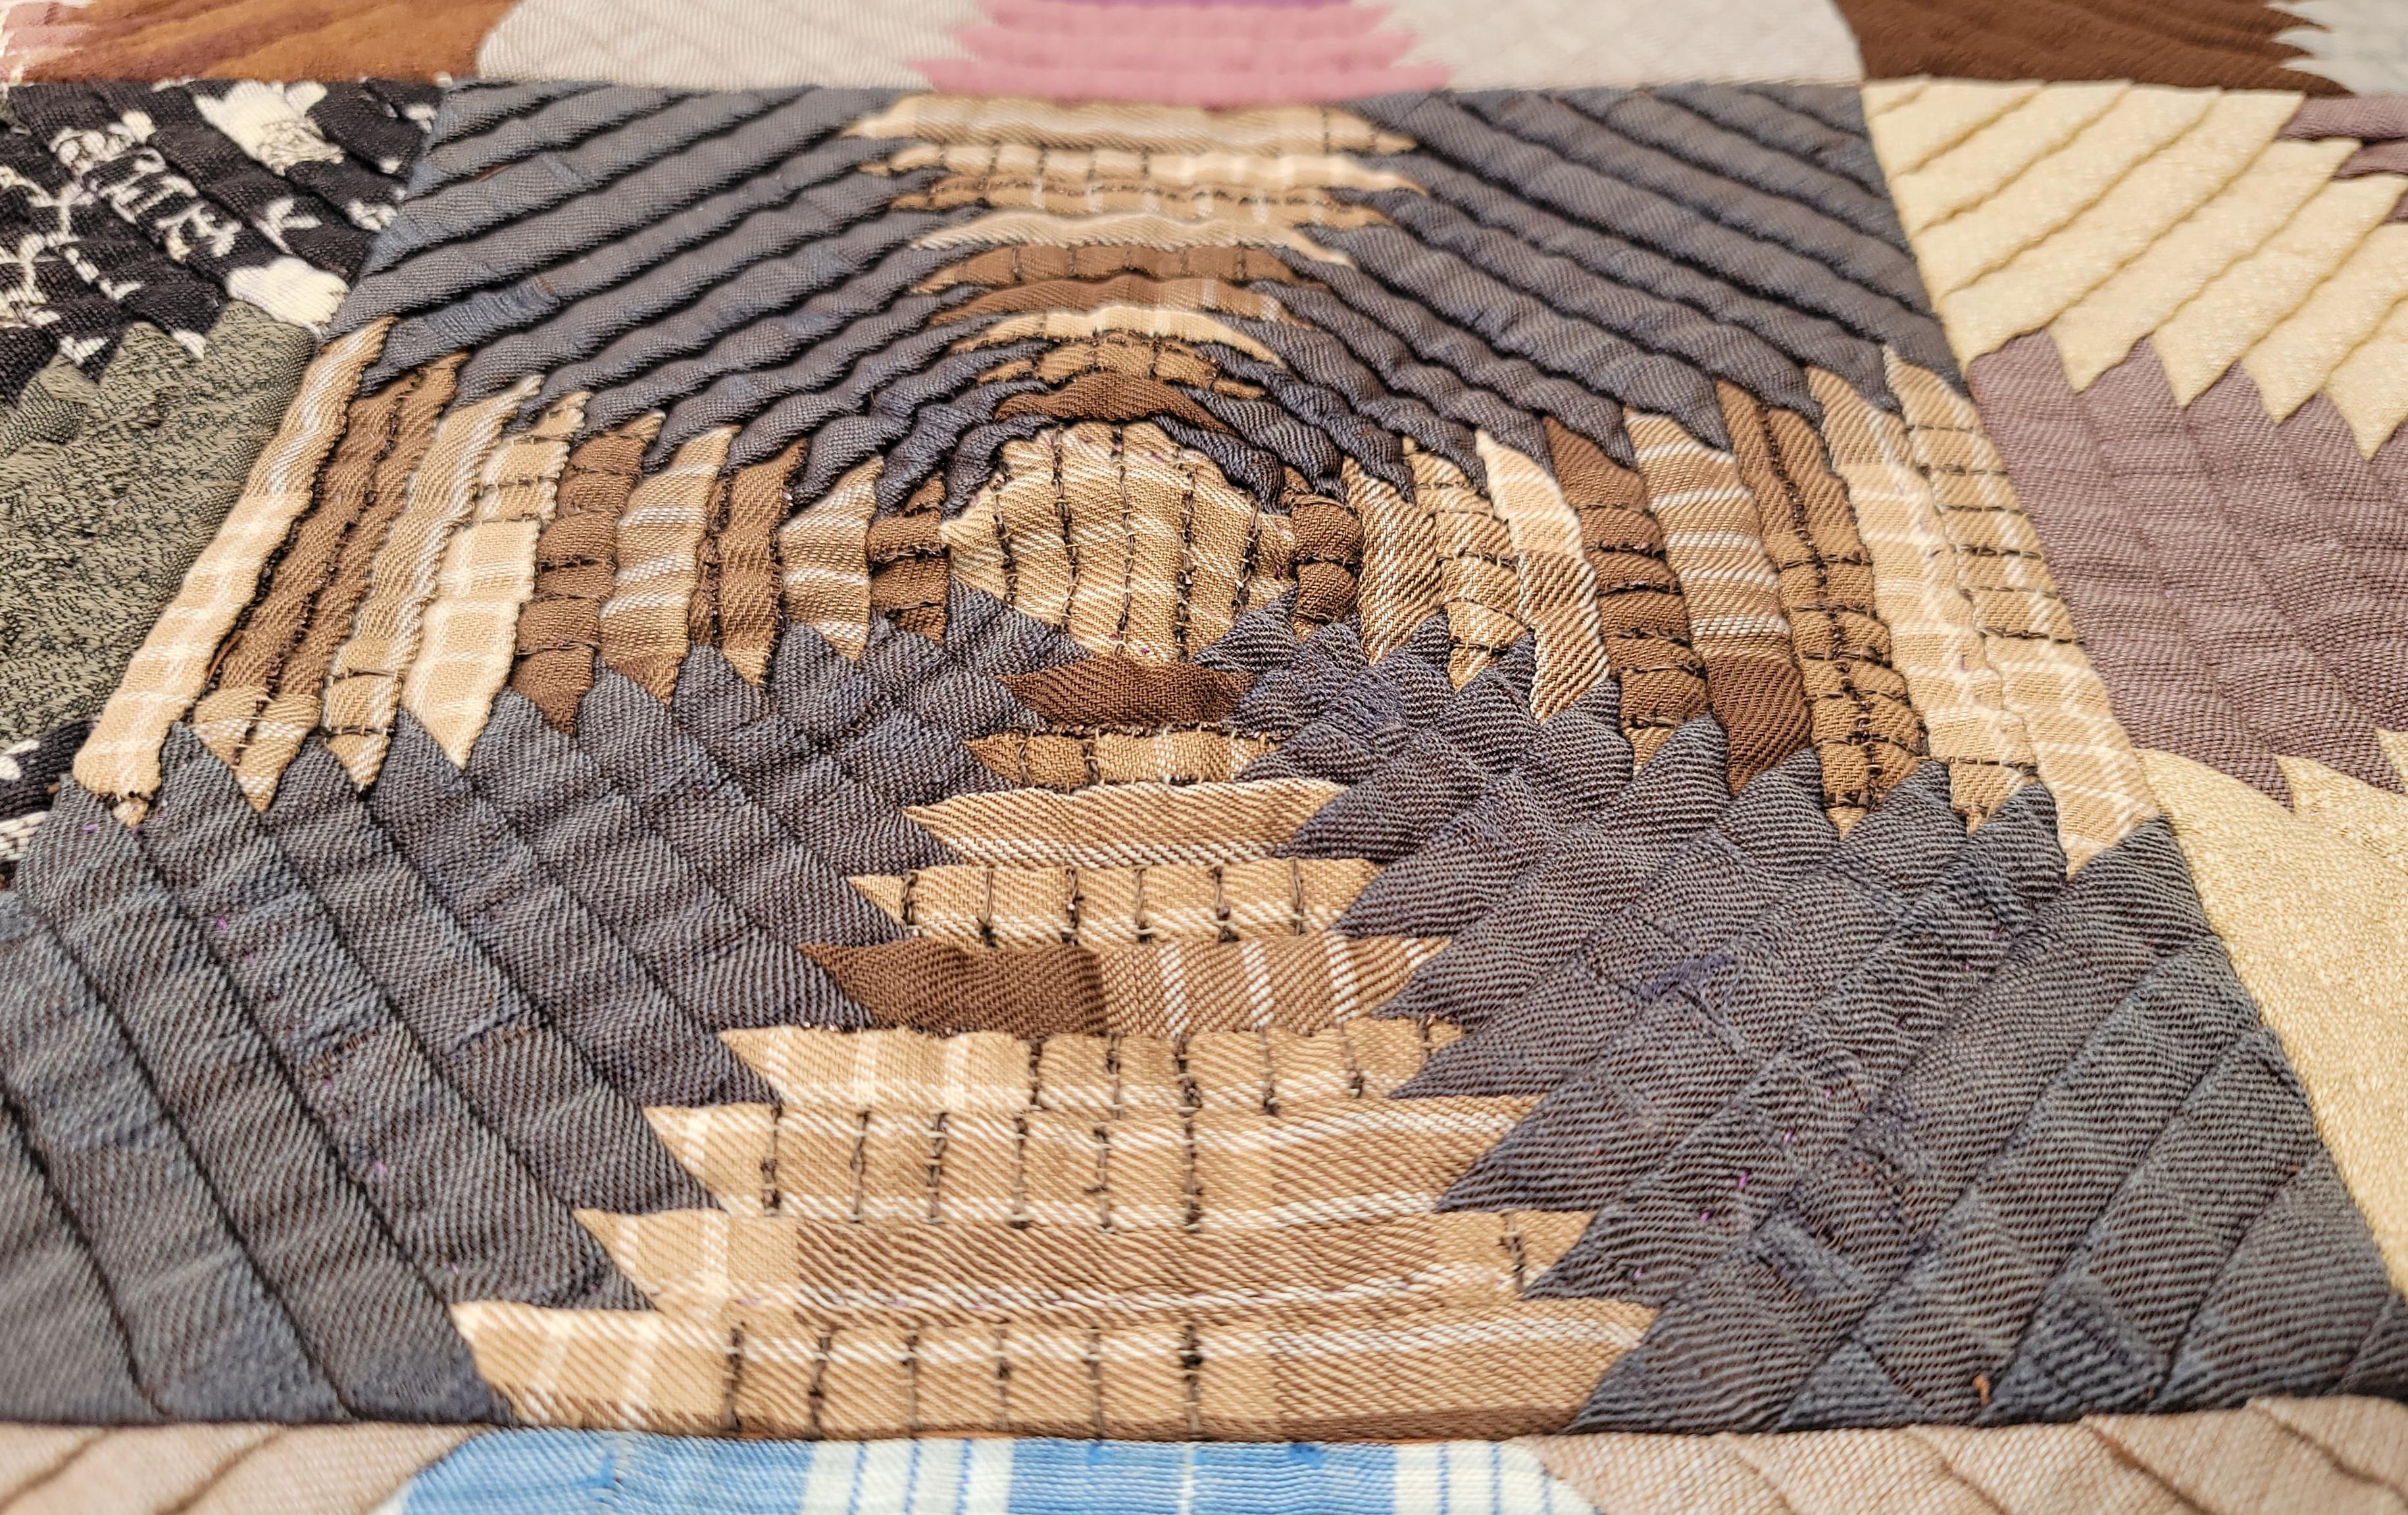 19thc wool pineapple log cabin quilt in pristine condition. This fine mini pieced log cabin quilt is from Lancaster County,Pennsylvania and was made in the 1870's and in pristine condition.From a private collection.